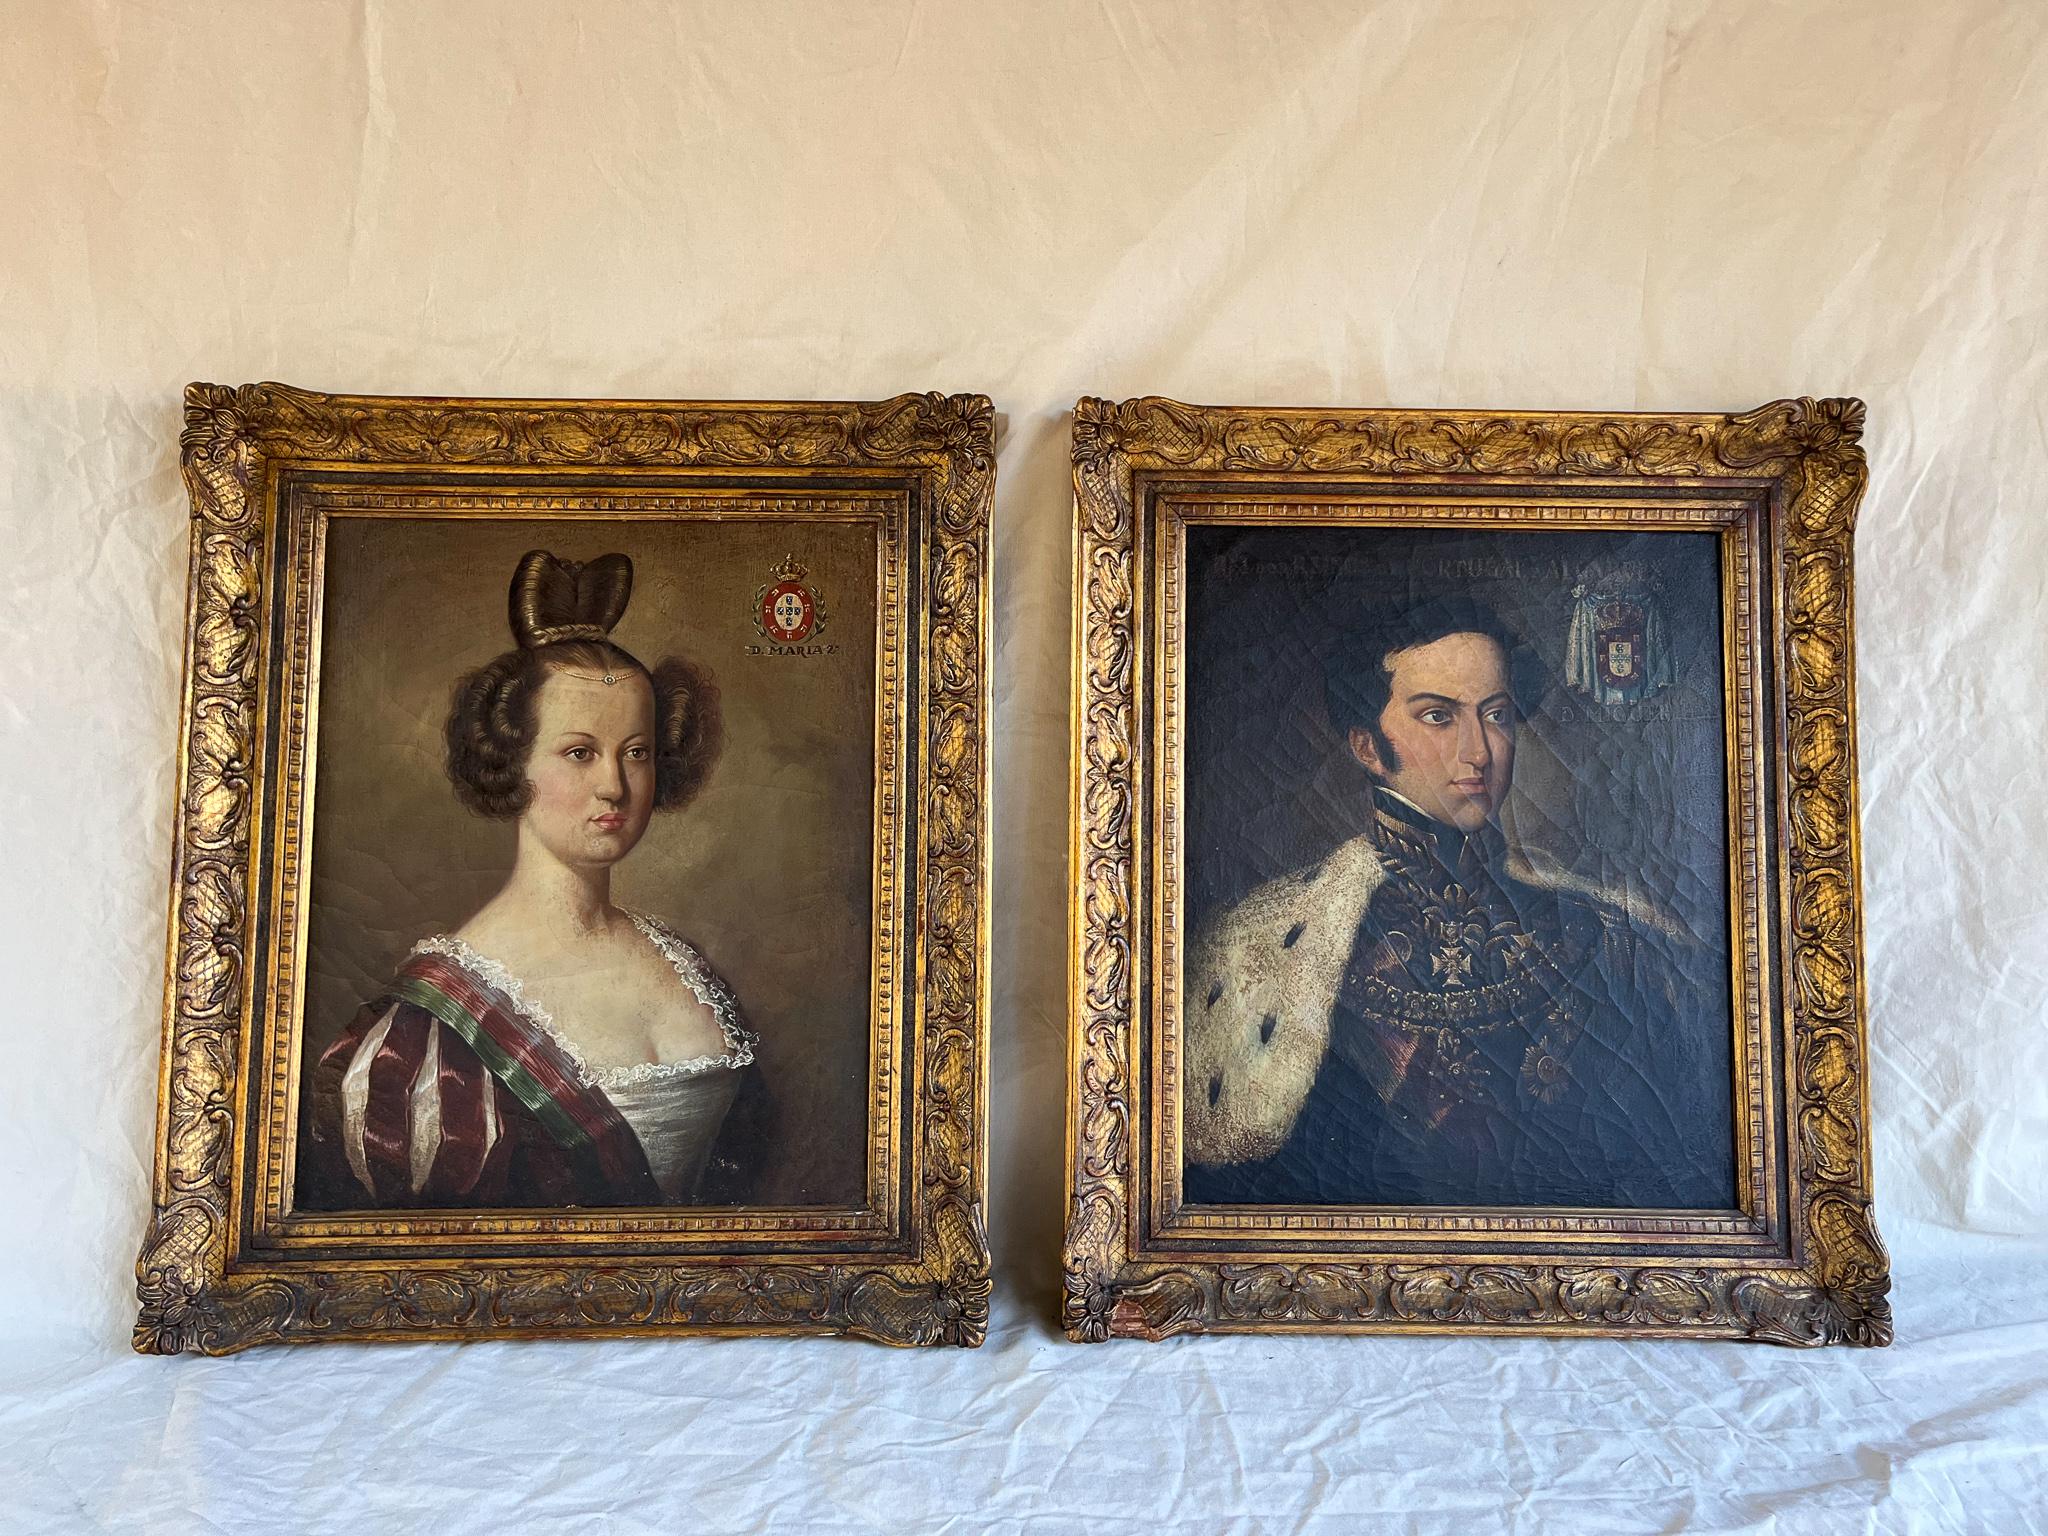 Pair of portraits of Dom Miguel and Dona Maria II, 19th Century Portugal.